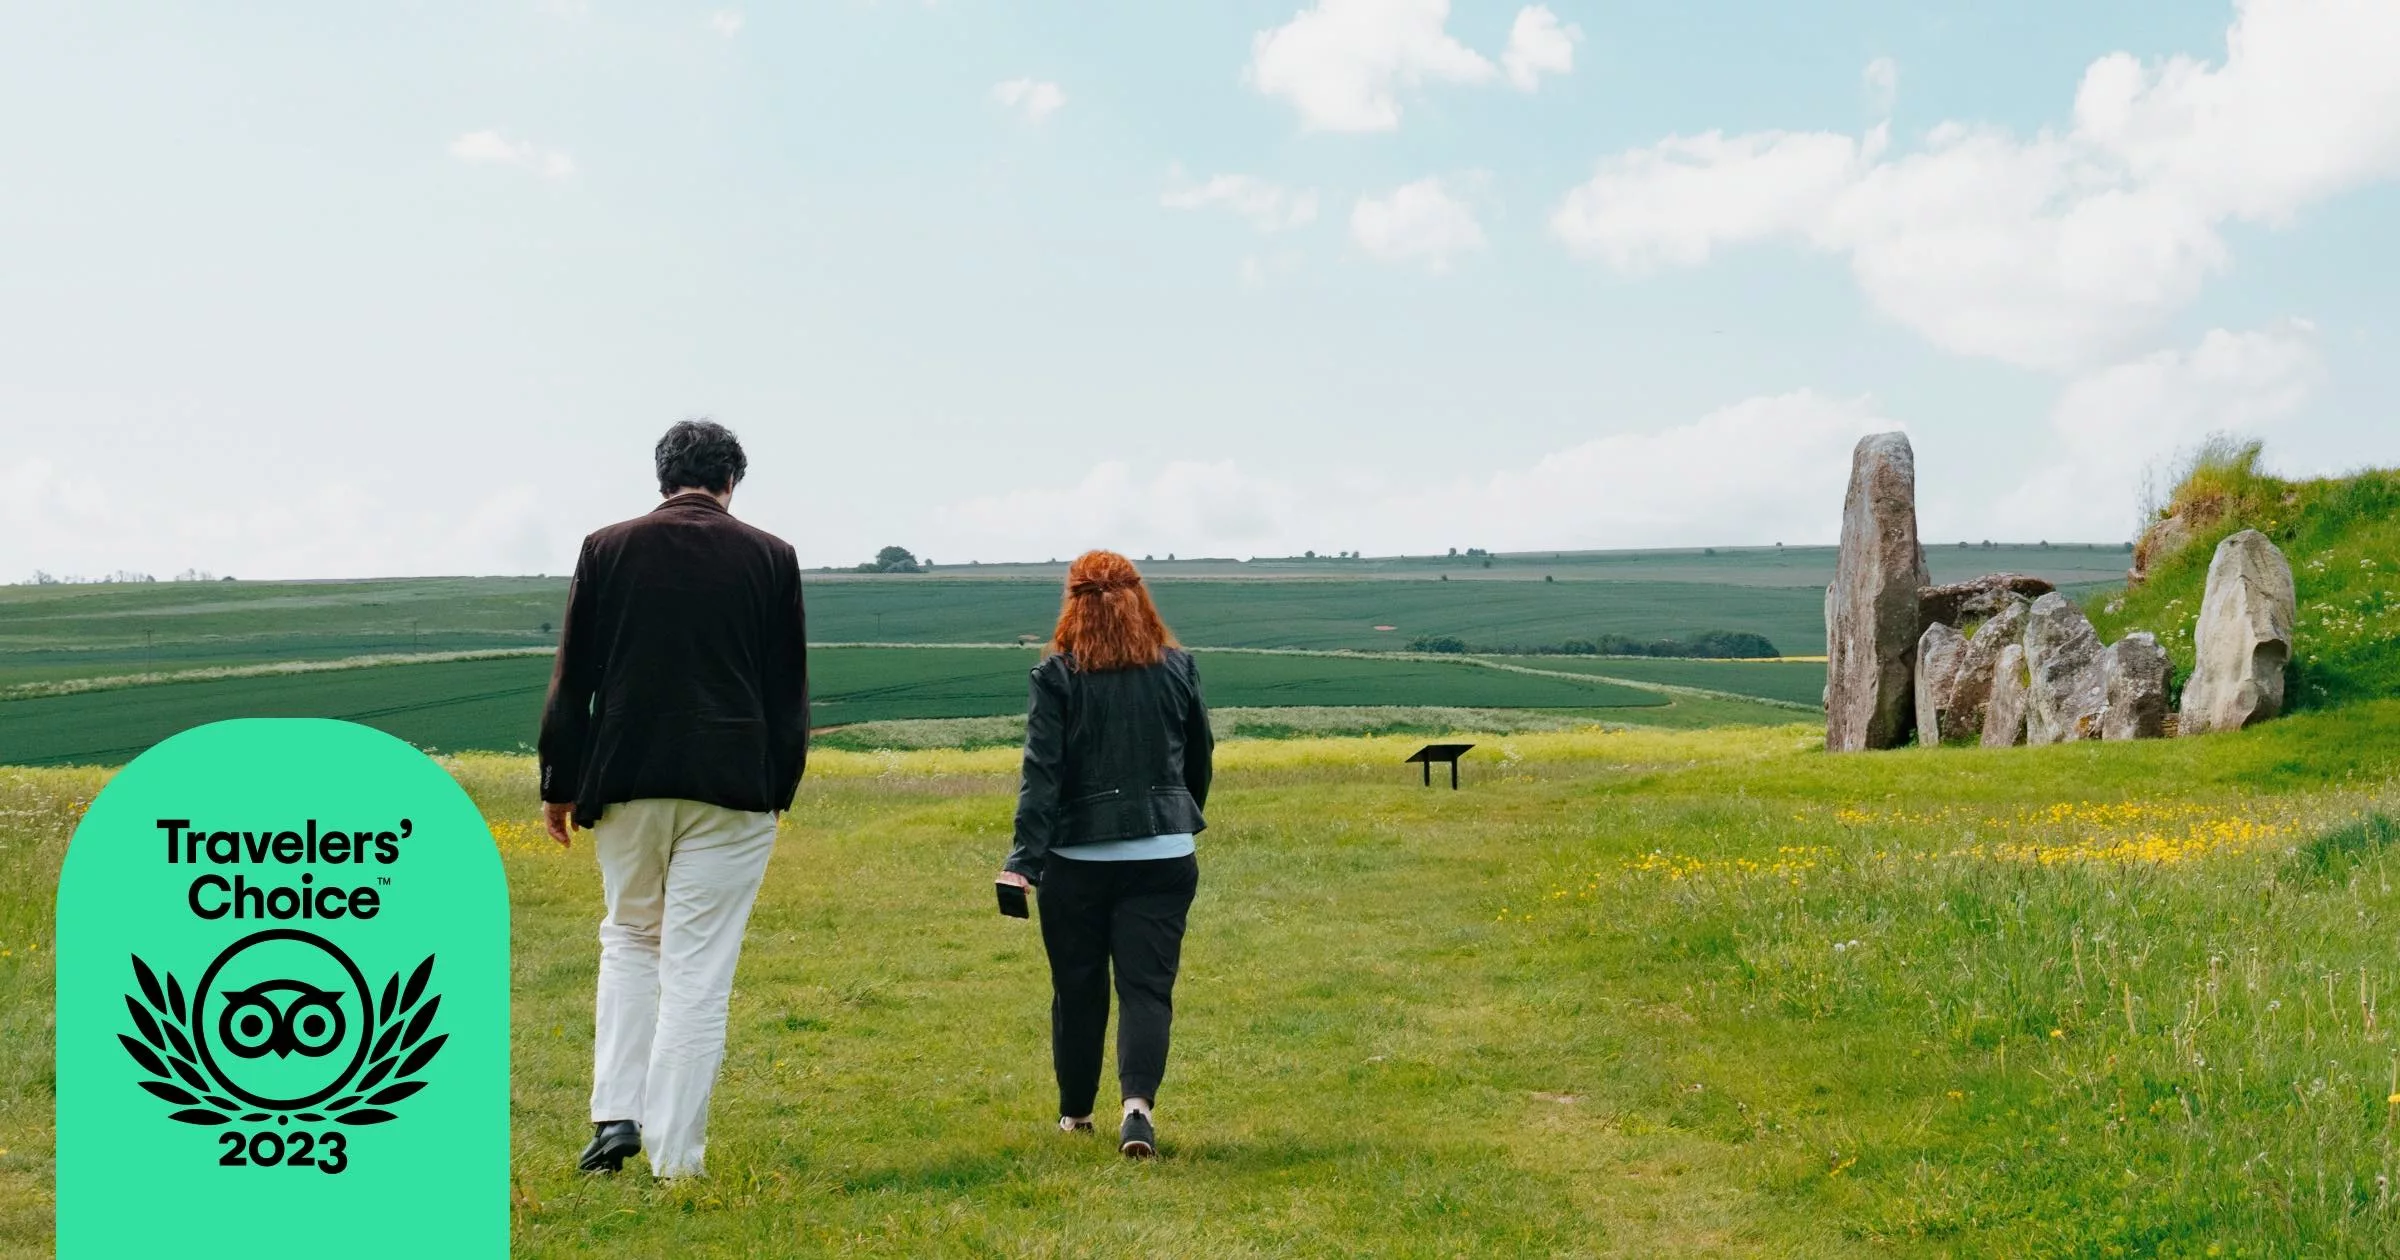 2 people in frame with their backs turned as they walk towards stone formation. Grass fields surround the two subjects.